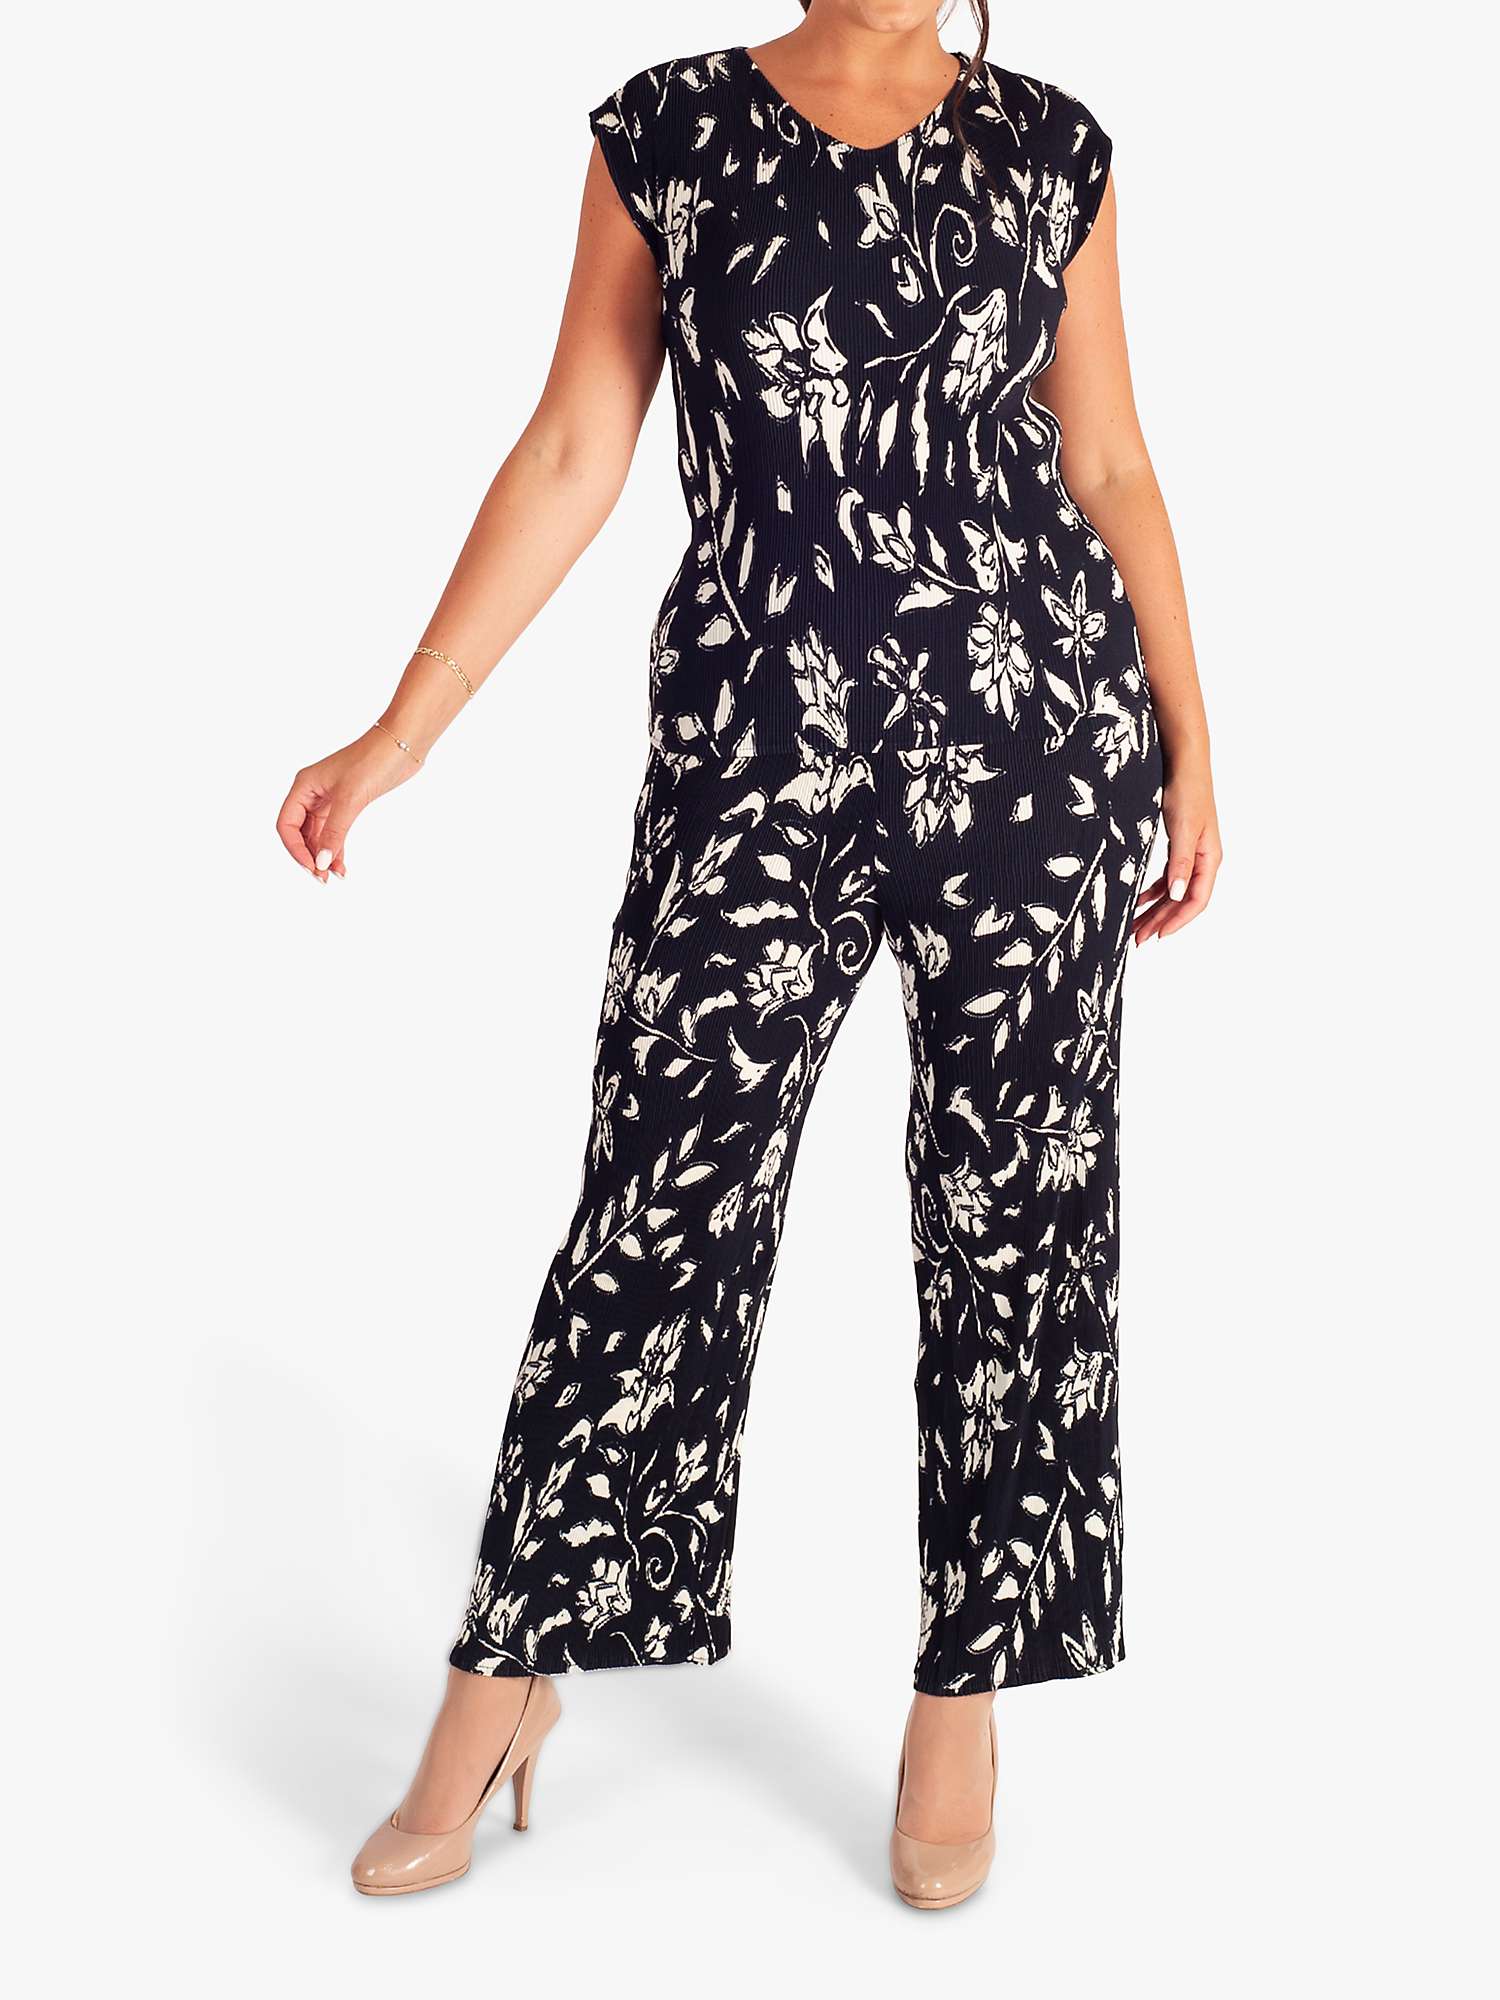 Buy chesca Floral Cap Sleeve Top, Navy/Ivory Online at johnlewis.com